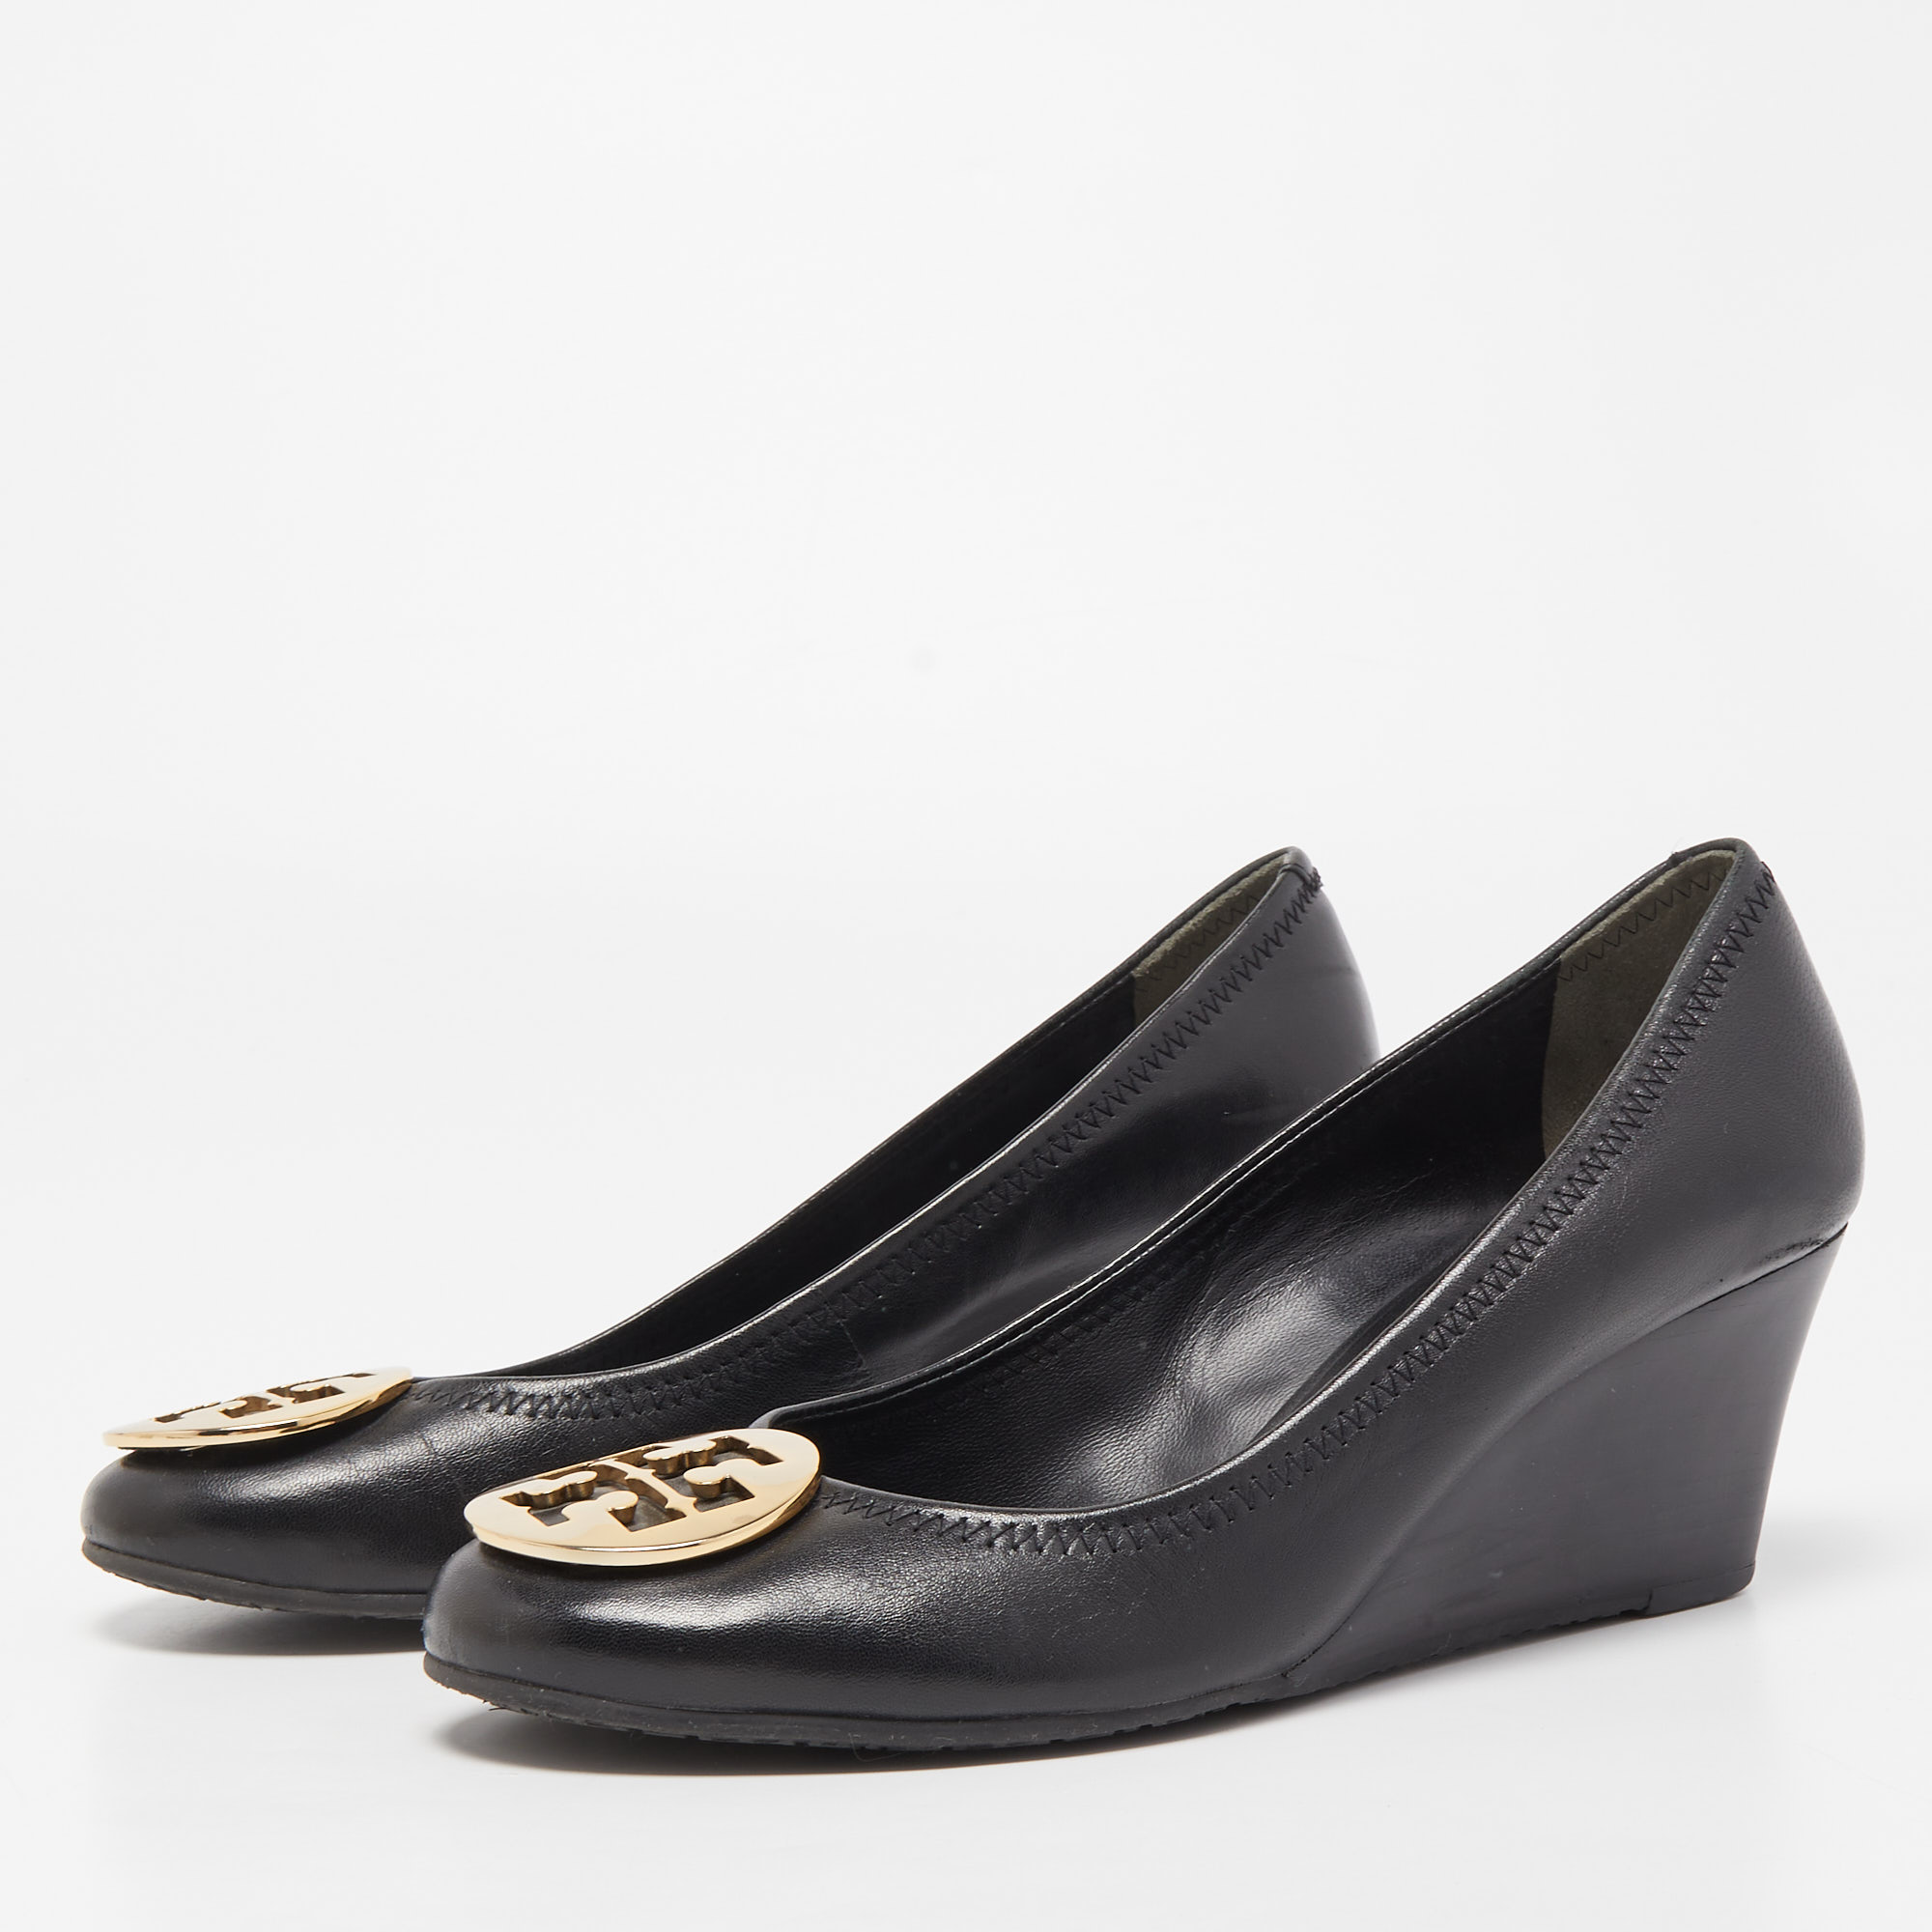 

Tory Burch Black Leather Sophie Wedge Pumps Size